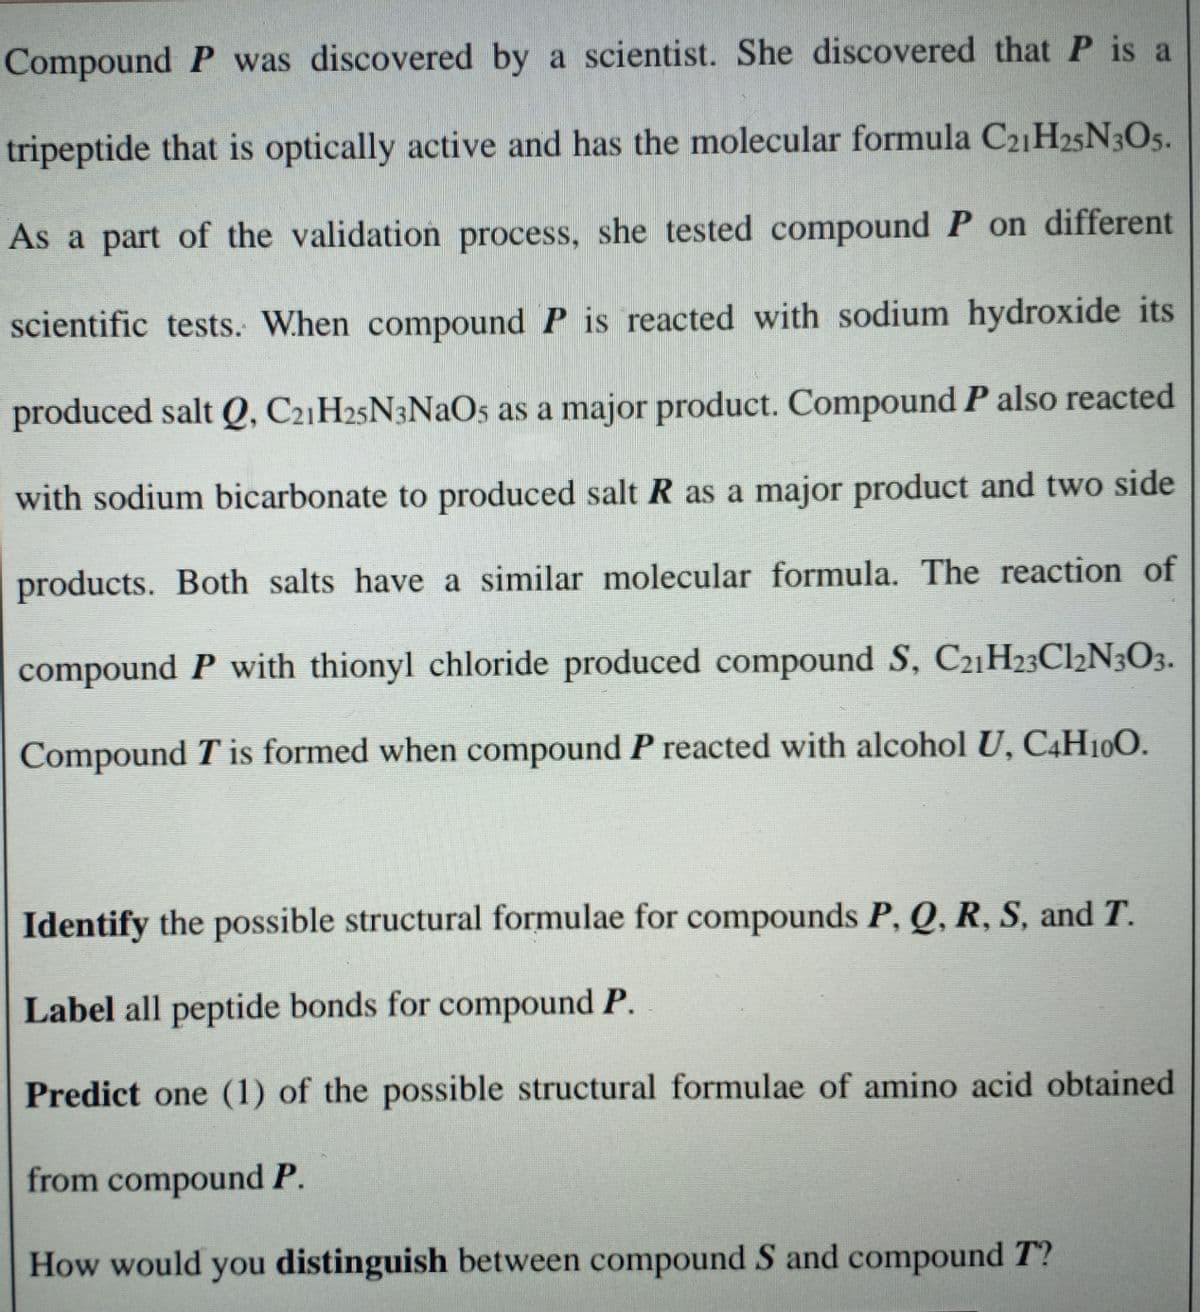 Compound P was discovered by a scientist. She discovered that P is a
tripeptide that is optically active and has the molecular formula C21H25N3O5.
As a part of the validation process, she tested compound P on different
scientific tests. When compound P is reacted with sodium hydroxide its
produced salt Q, C21H25N3NAO5 as a major product. Compound P also reacted
with sodium bicarbonate to produced salt R as a major product and two side
products. Both salts have a similar molecular formula. The reaction of
compound P with thionyl chloride produced compound S, C21H23Cl½N3O3.
Compound T is formed when compound P reacted with alcohol U, C4H100.
Identify the possible structural formulae for compounds P, Q, R, S, and T.
Label all peptide bonds for compound P.
Predict one (1) of the possible structural formulae of amino acid obtained
from compound P.
How would you distinguish between compound S and compound T?
